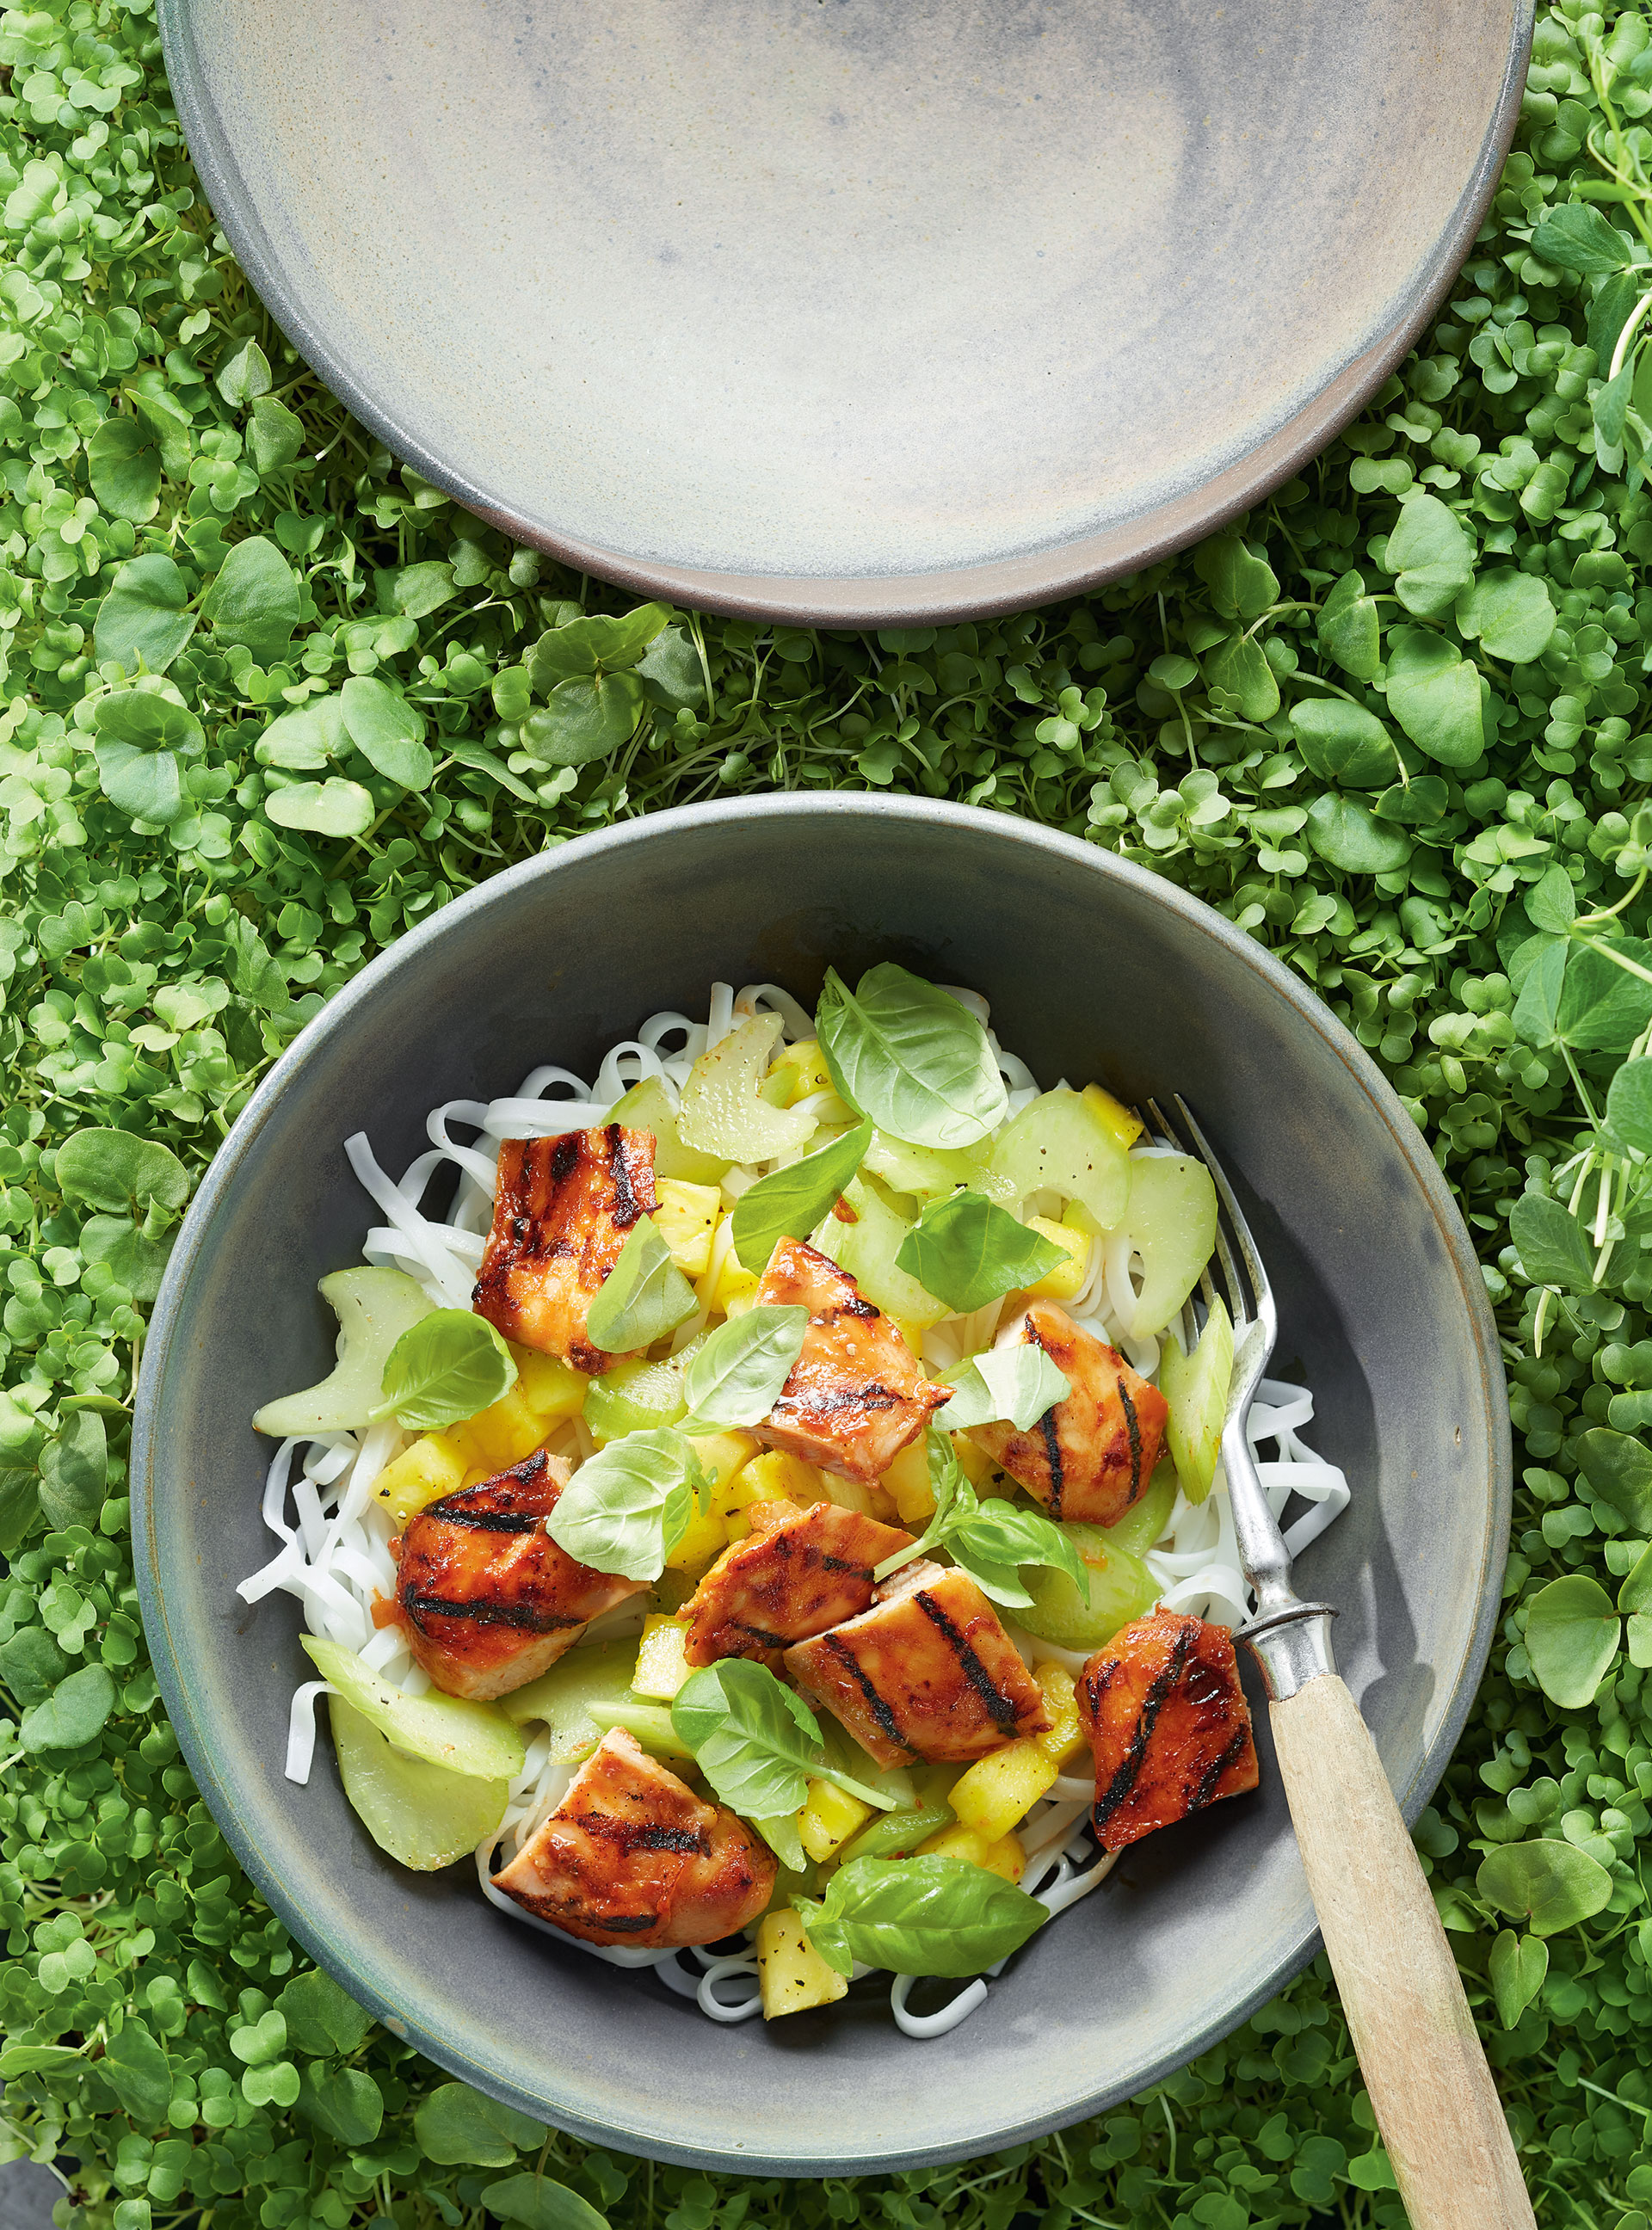 Barbecue Chicken Bowl with Celery and Pineapple Salad